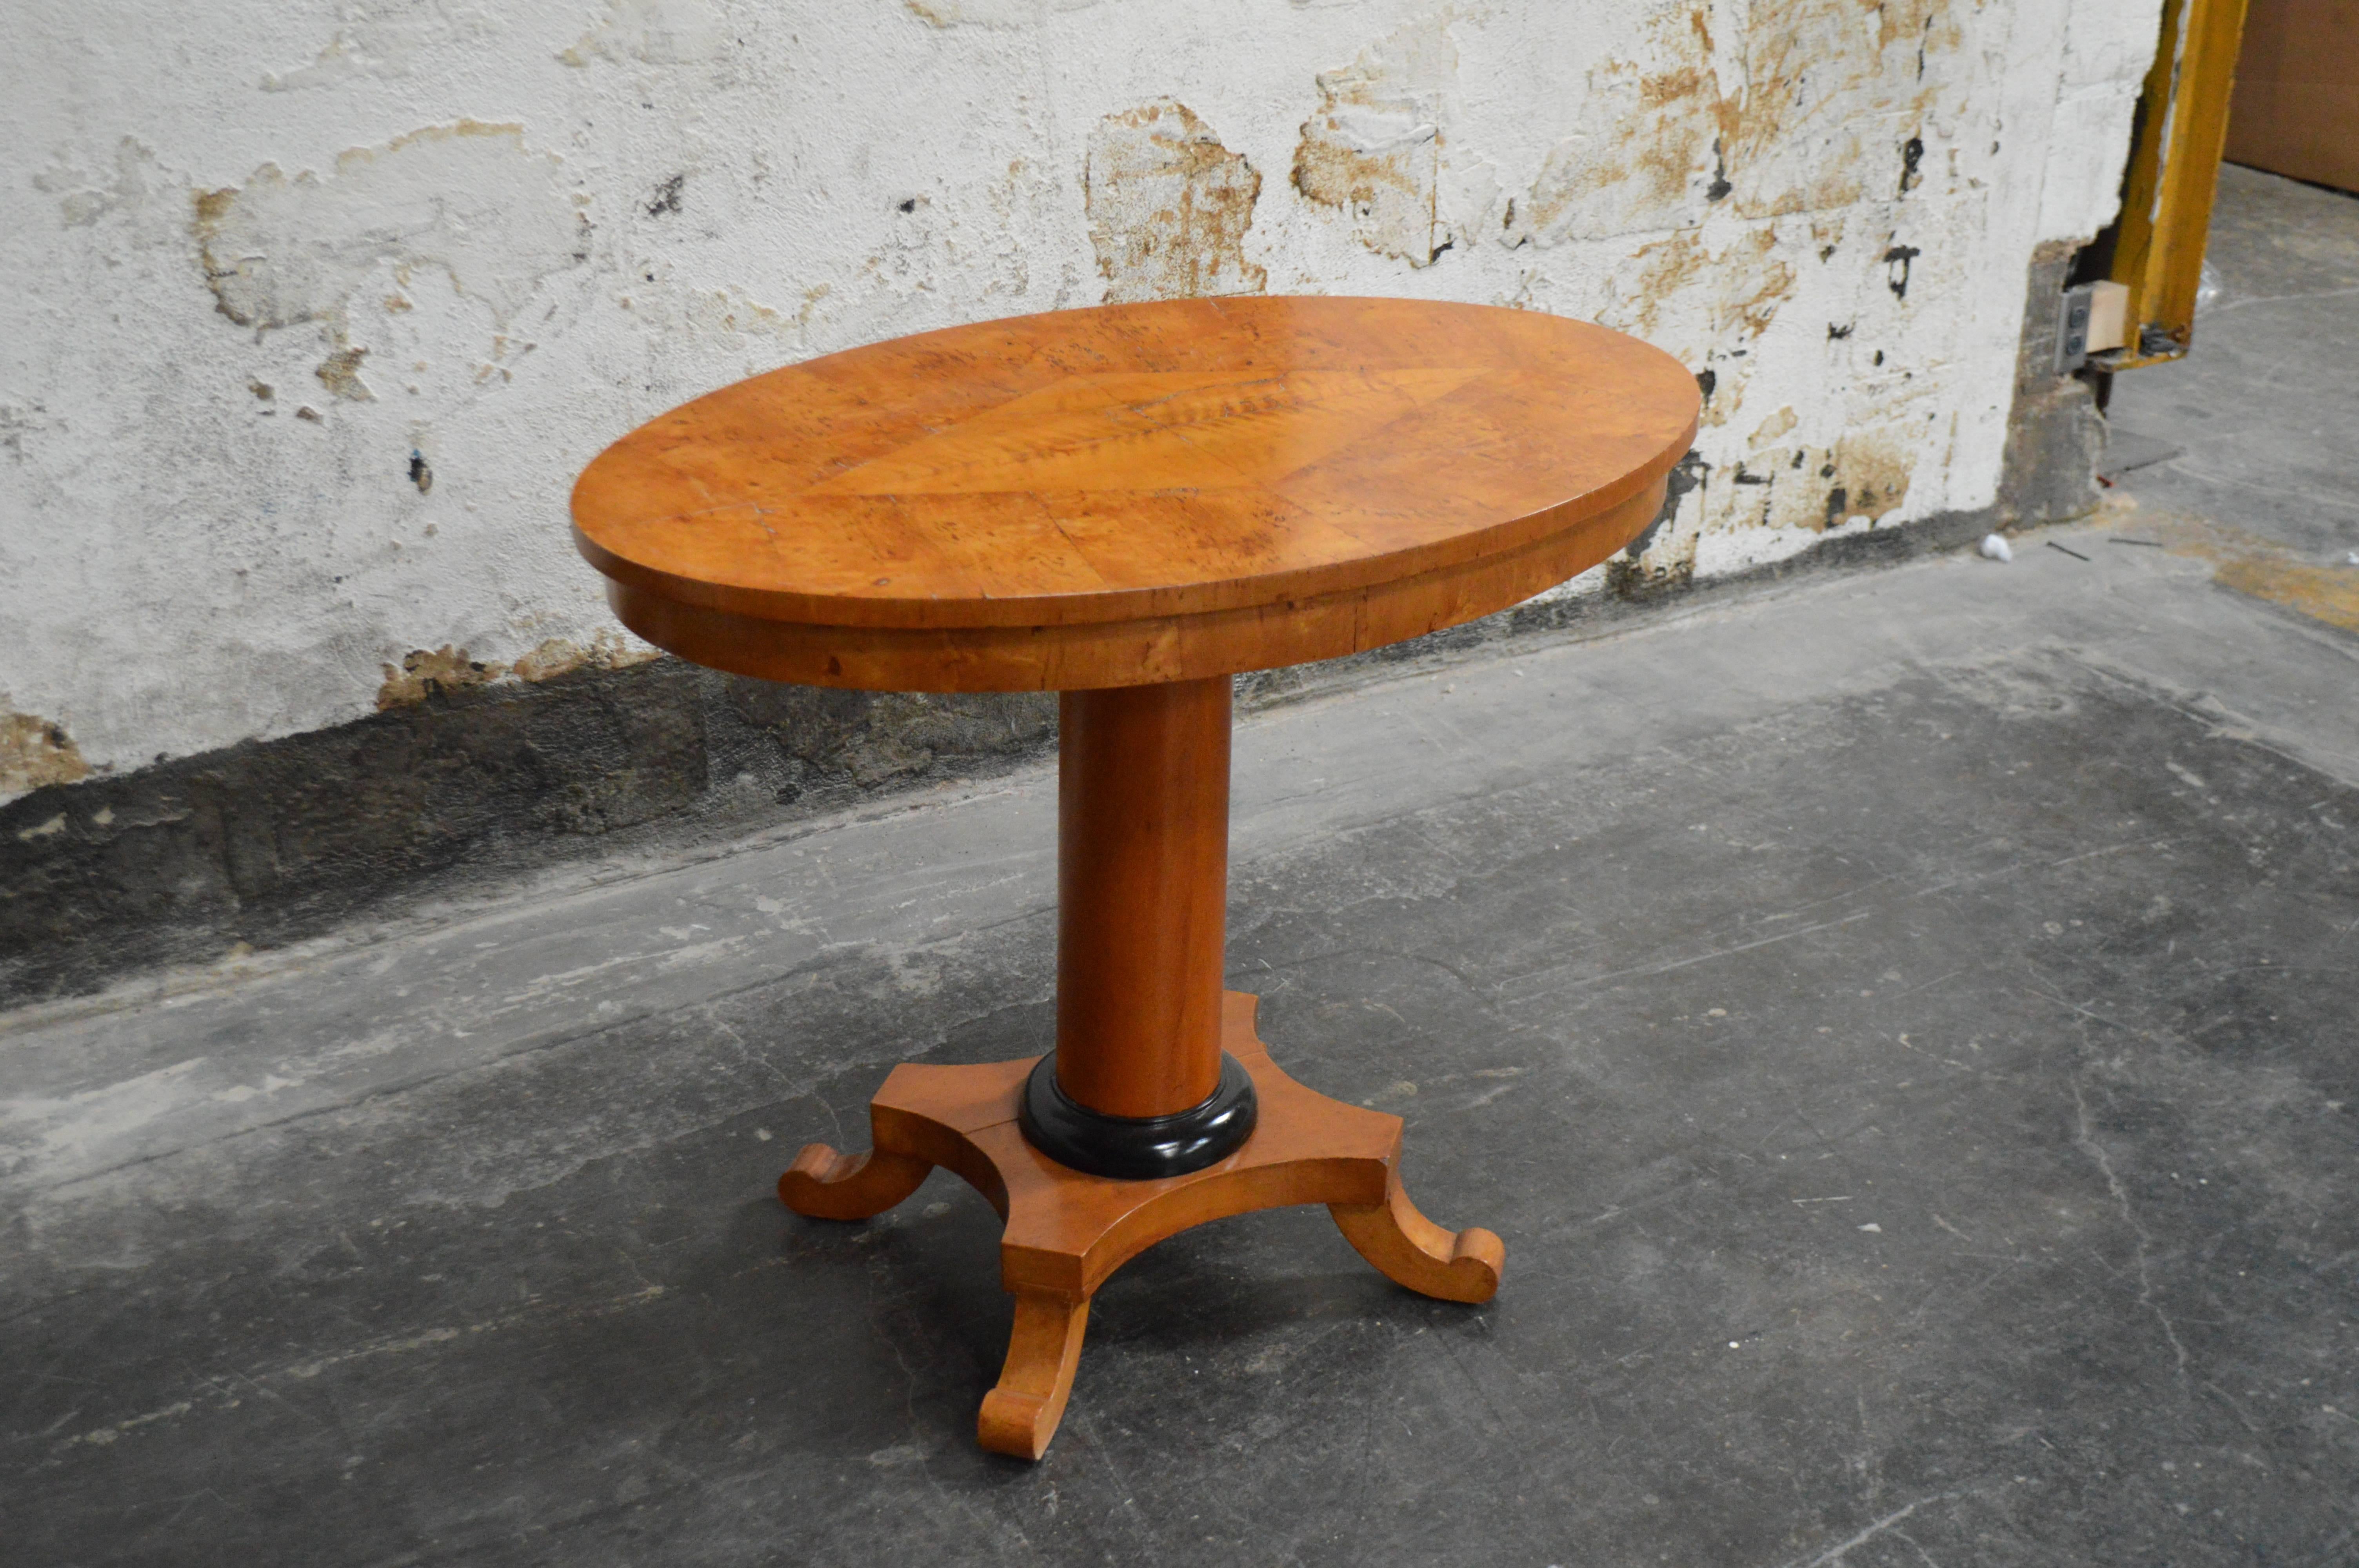 Swedish Karl Johan (Biedermeier) center or side table. Pedestal base with ebonized accents. Burl wood top with center diamond inlay. Very handsome piece and graciously scaled to be a end or side table or can even be used as a petite game table